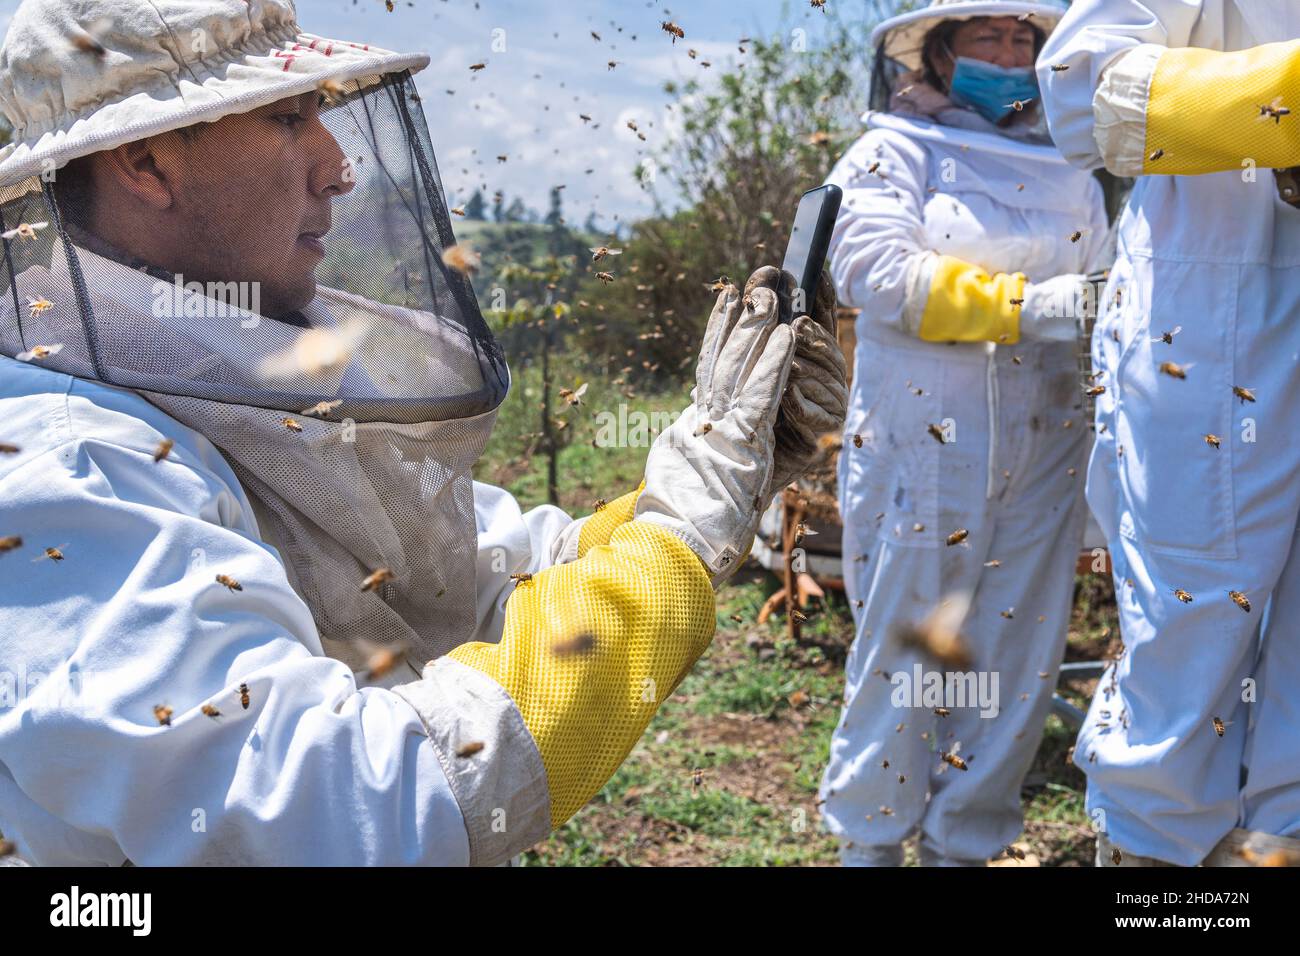 A Latino beekeeper takes pictures of the Abjeas honey harvest process in a hive with other workers in the field Stock Photo